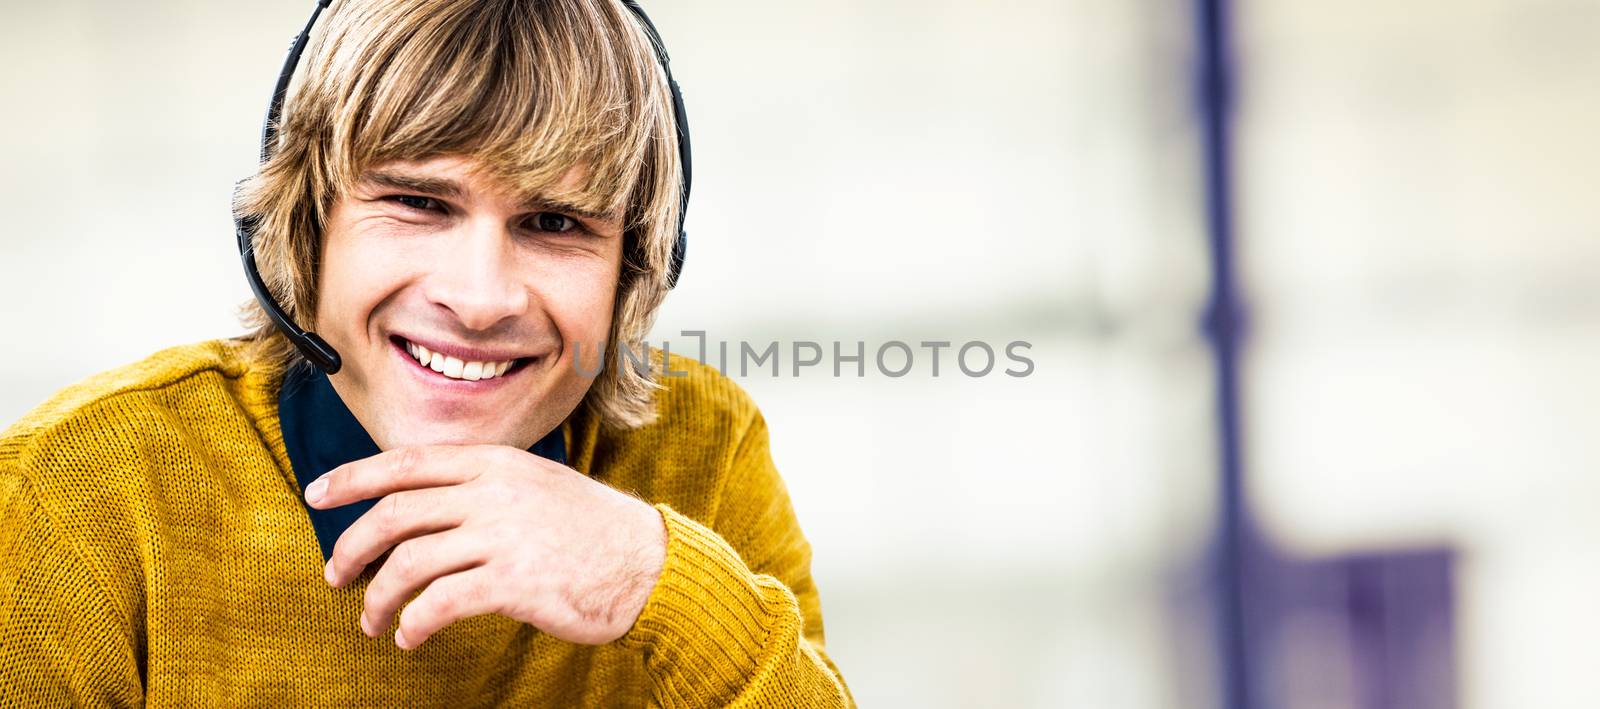 Smiling hipster businessman using headset against pies on a wooden table